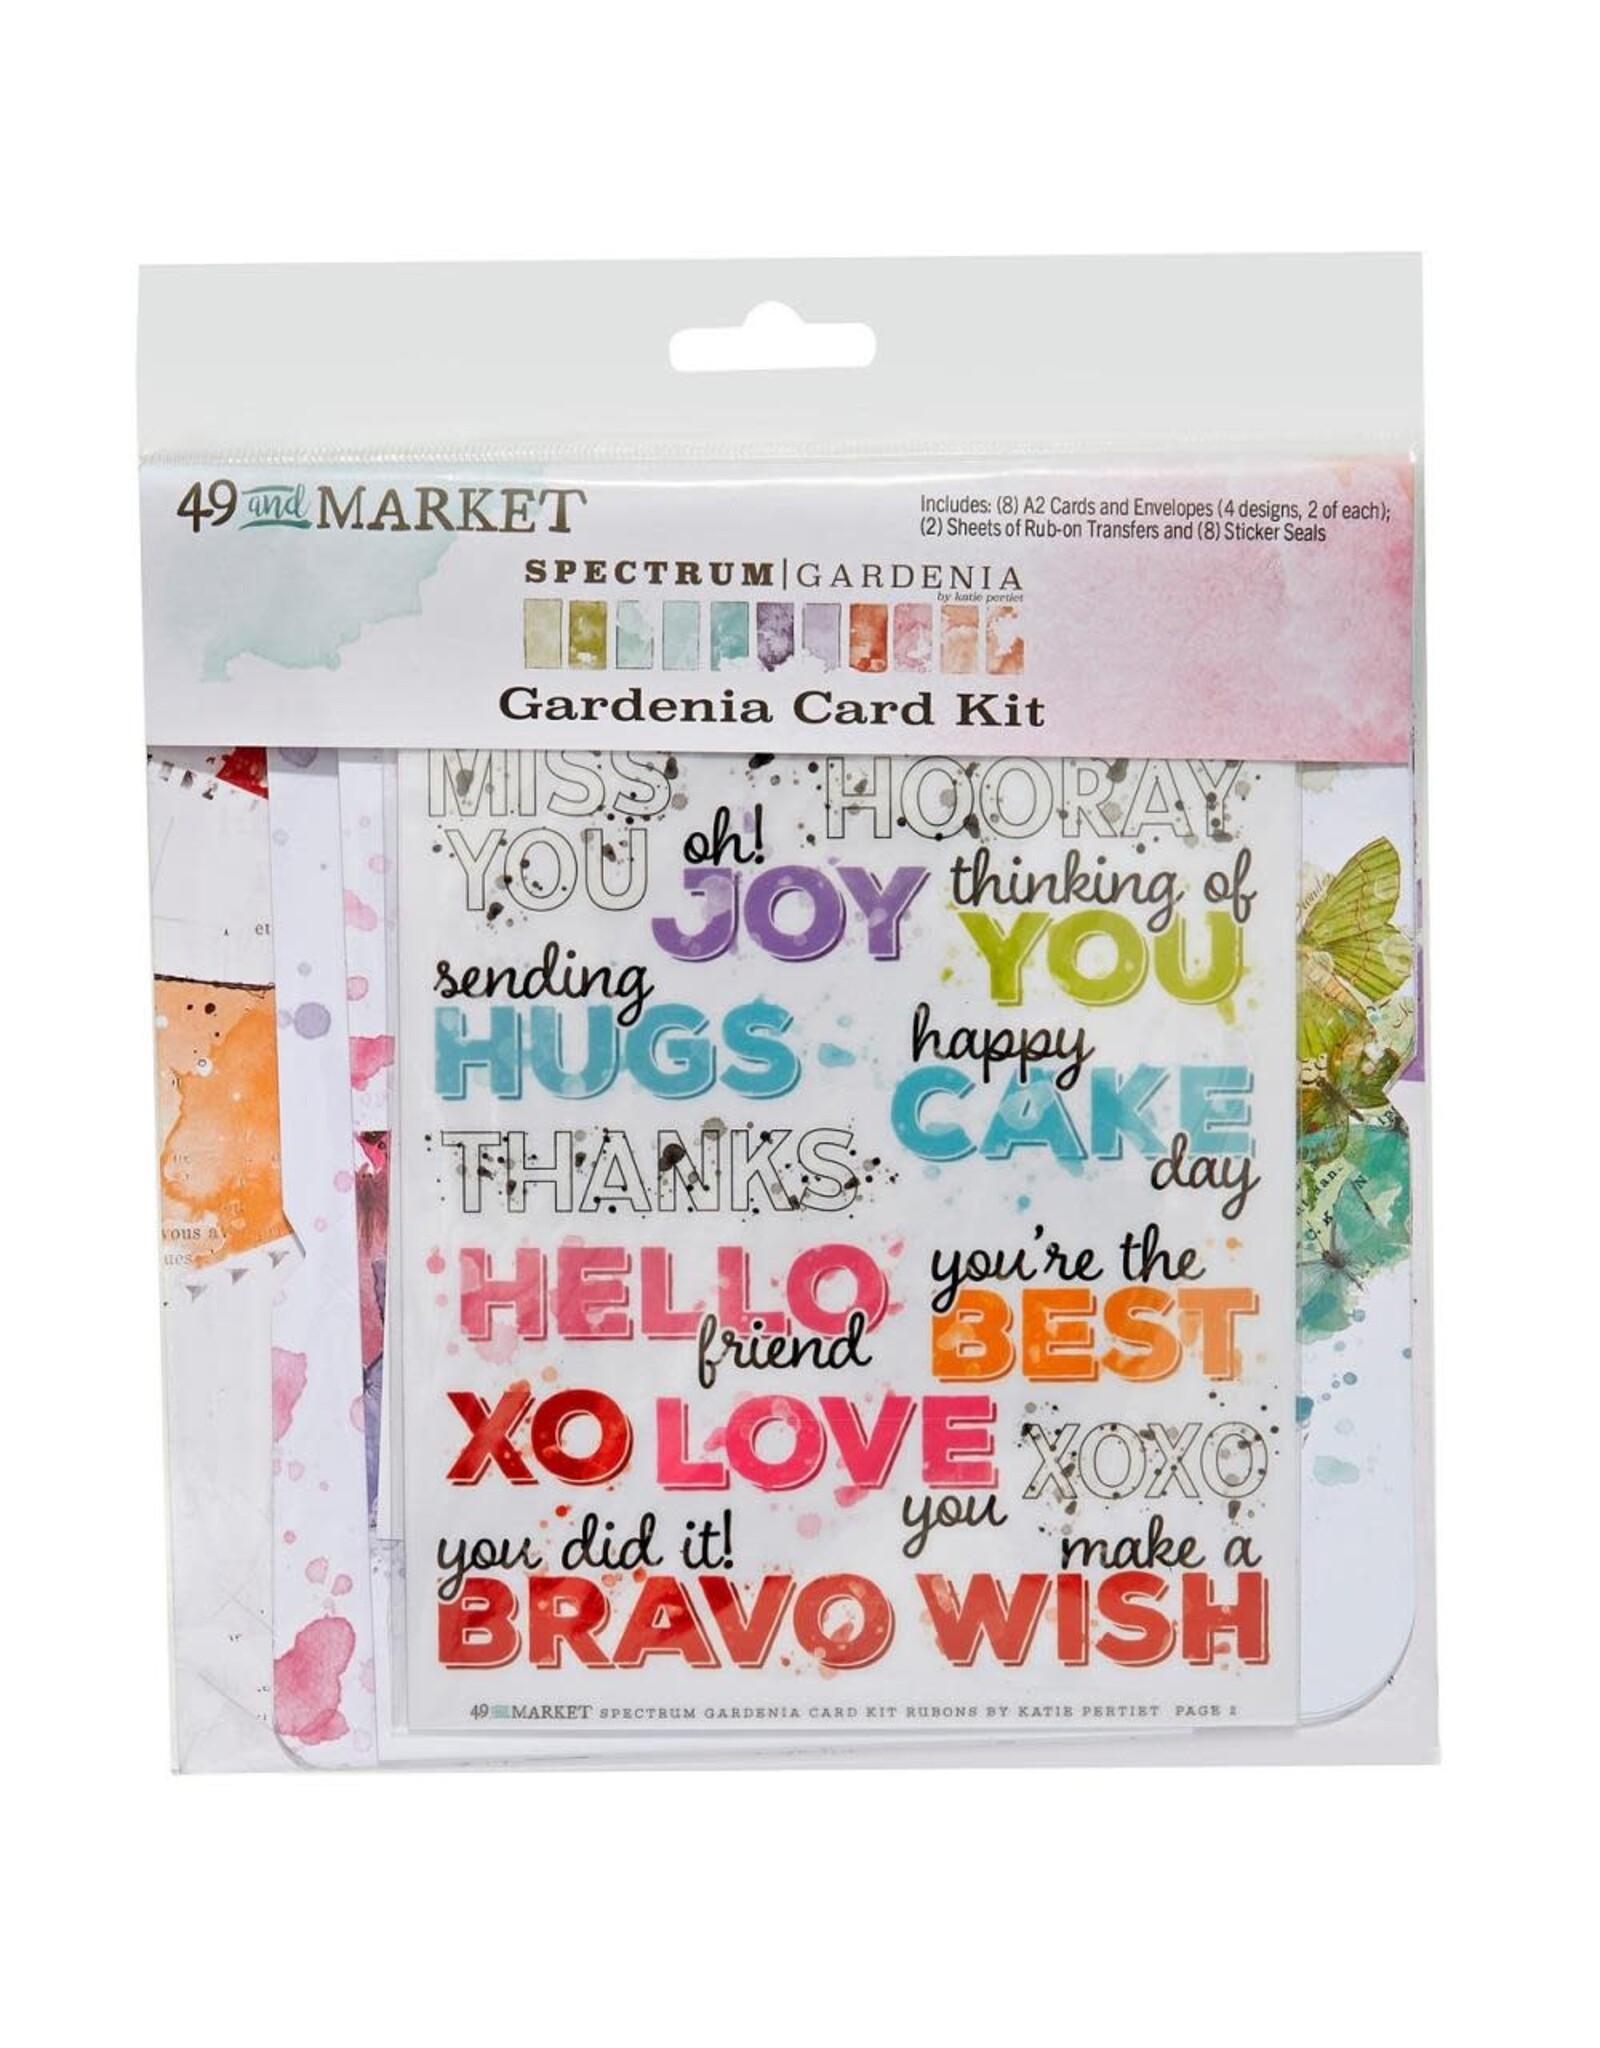 49 AND MARKET 49 AND MARKET SPECTRUM GARDENIA CARD KIT